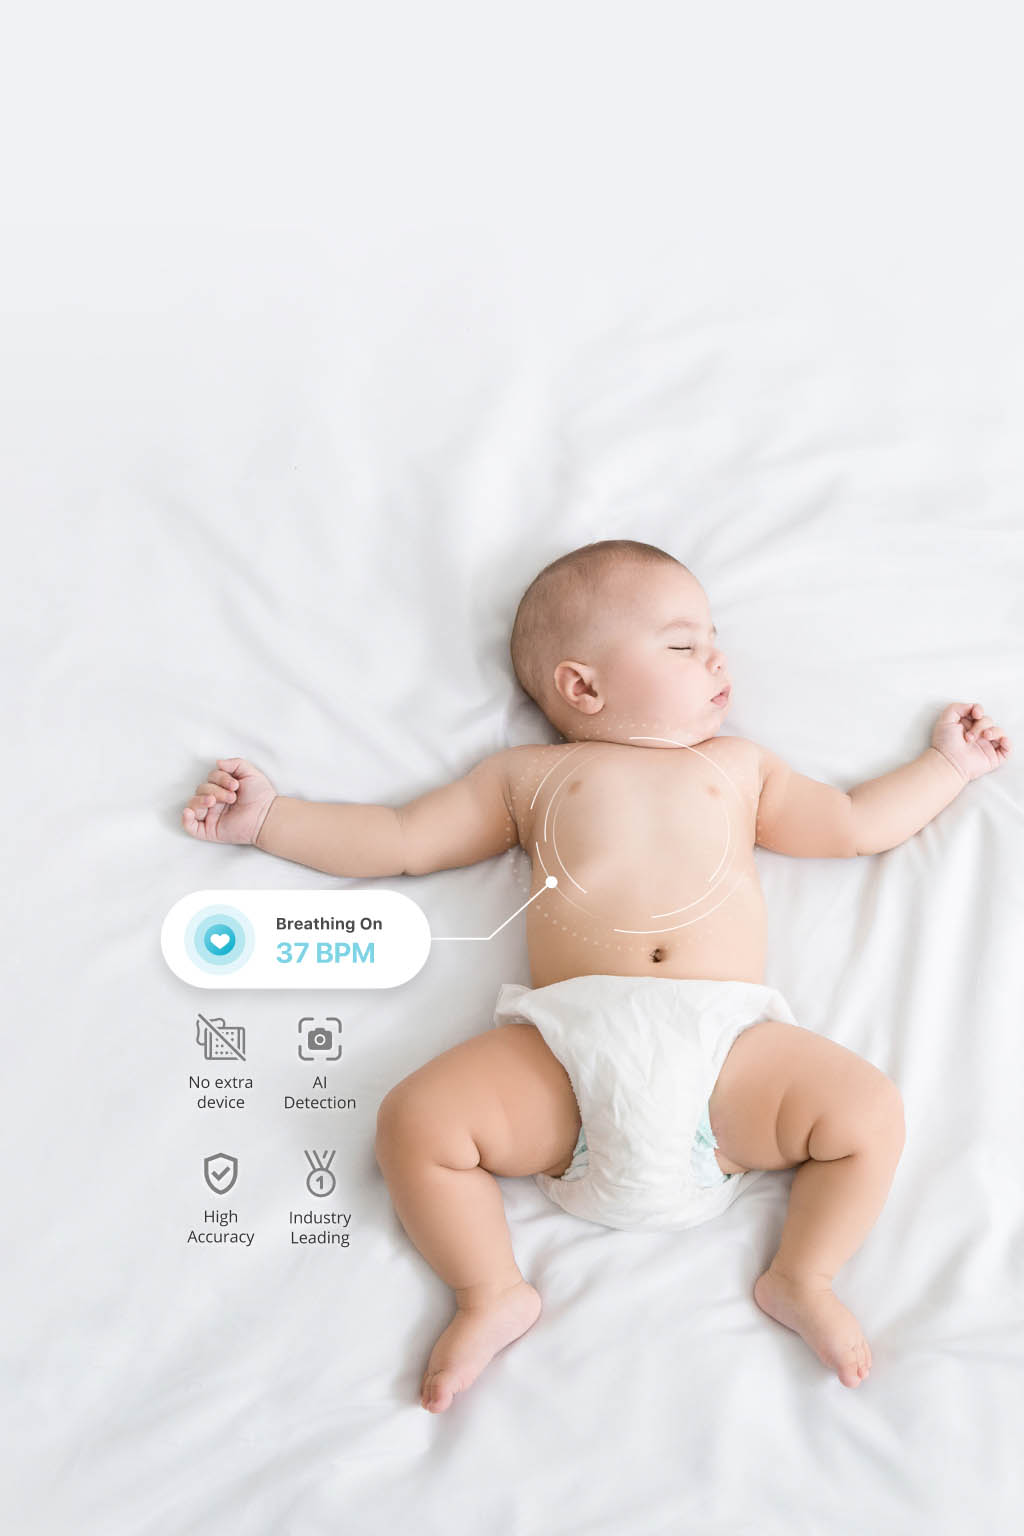 Lollipop Baby Monitor (Turquoise) - with Contactless Breathing Monitoring  (No Extra Sensor Required, Subscription Service), Sleep Tracking and True